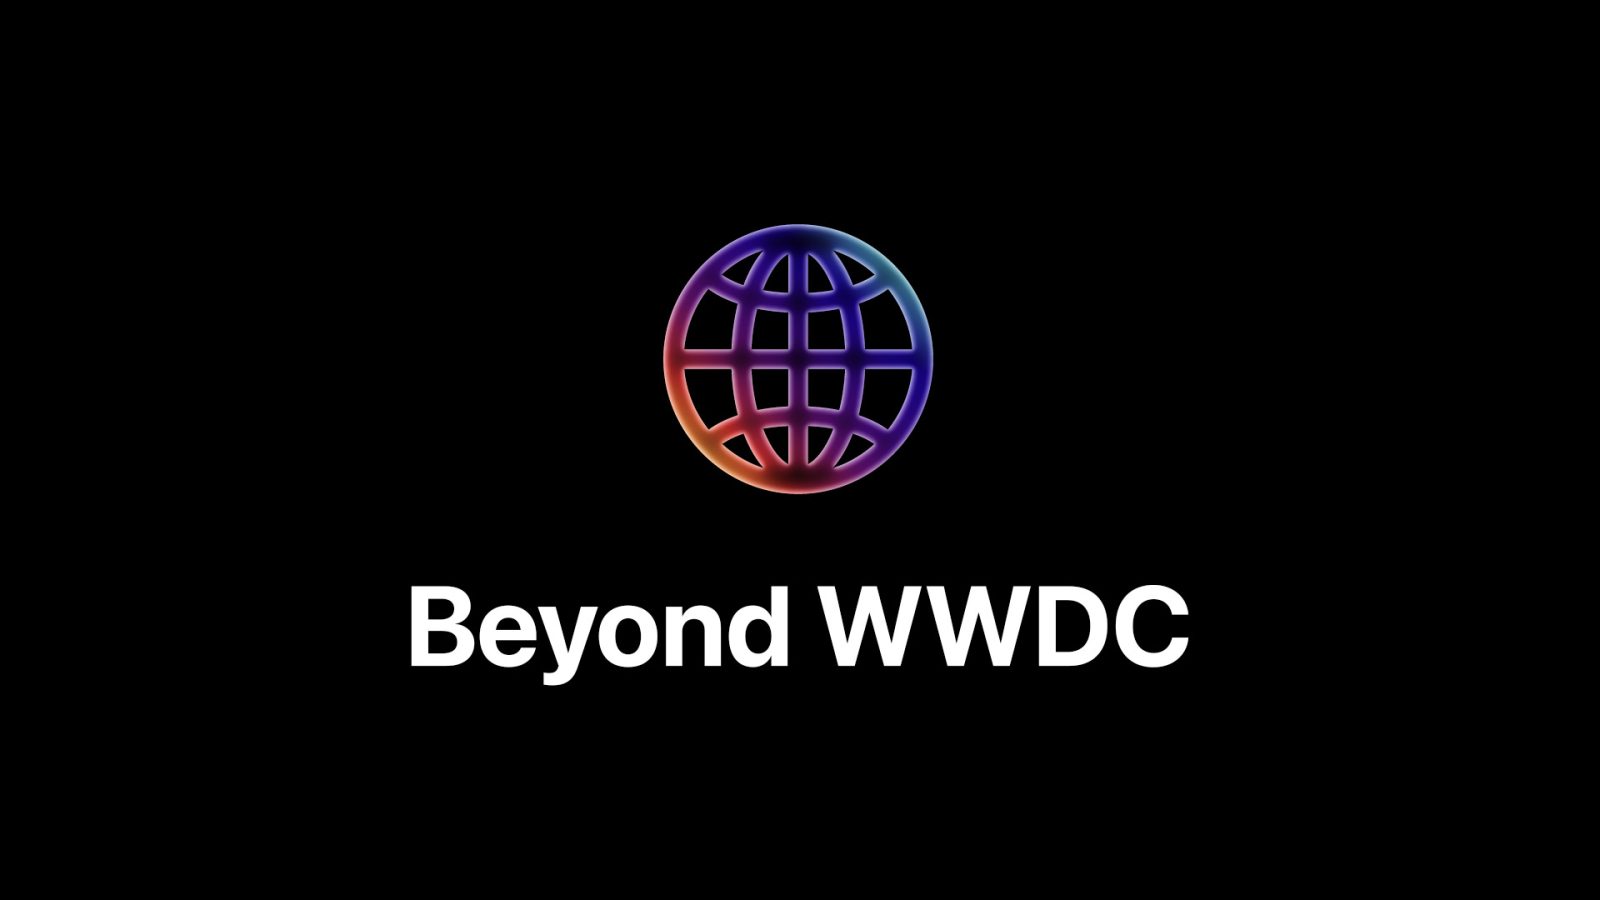 Apple highlights 'Beyond WWDC' events happening next week around the world